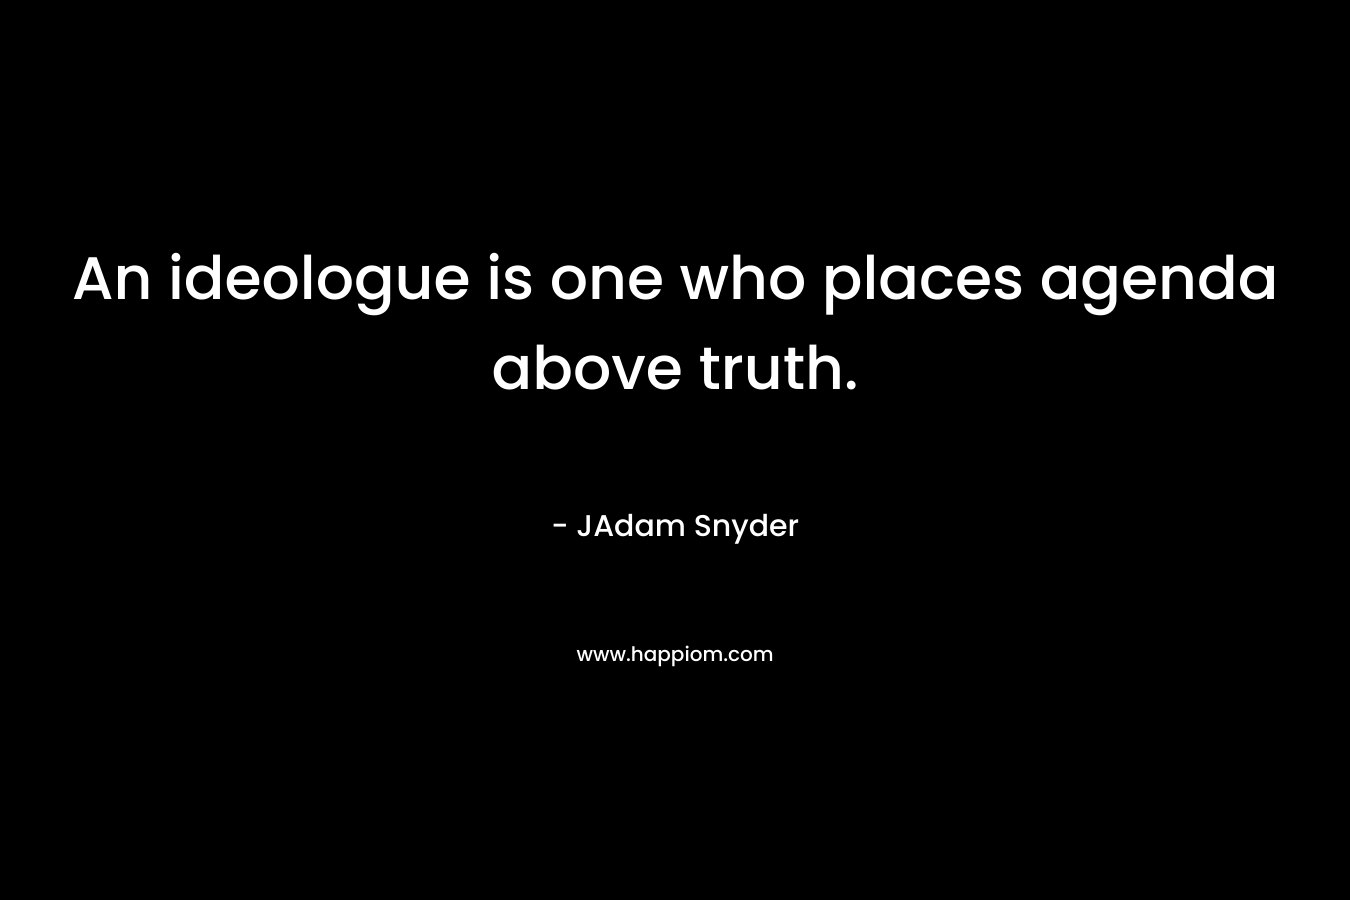 An ideologue is one who places agenda above truth. – JAdam Snyder